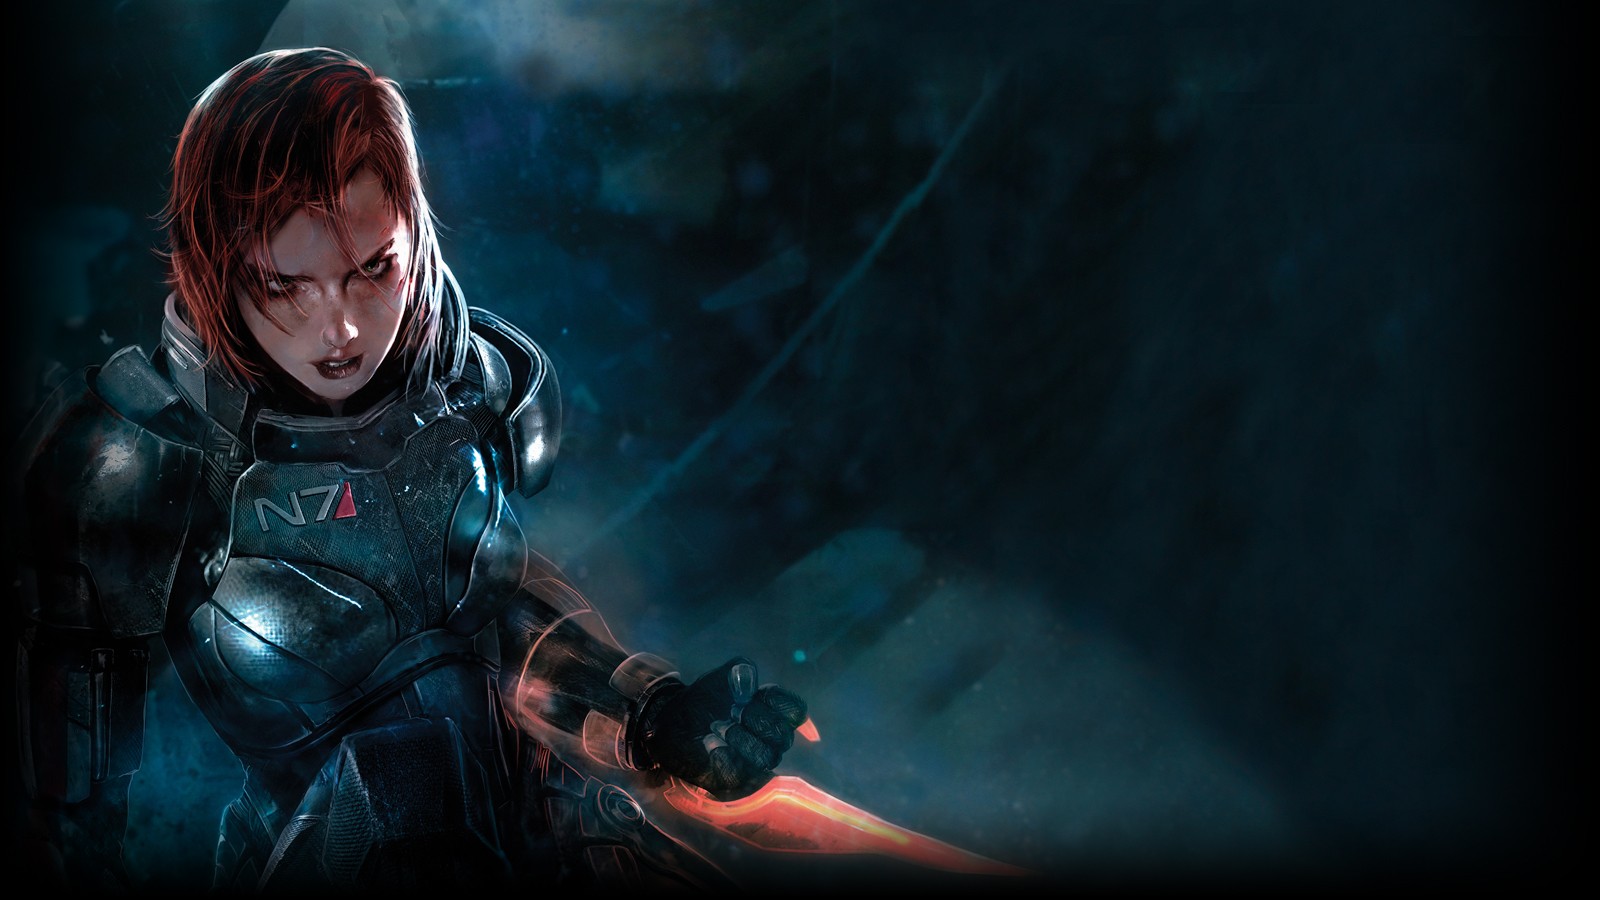 mass effect live wallpaper,action adventure game,pc game,cg artwork,fictional character,digital compositing